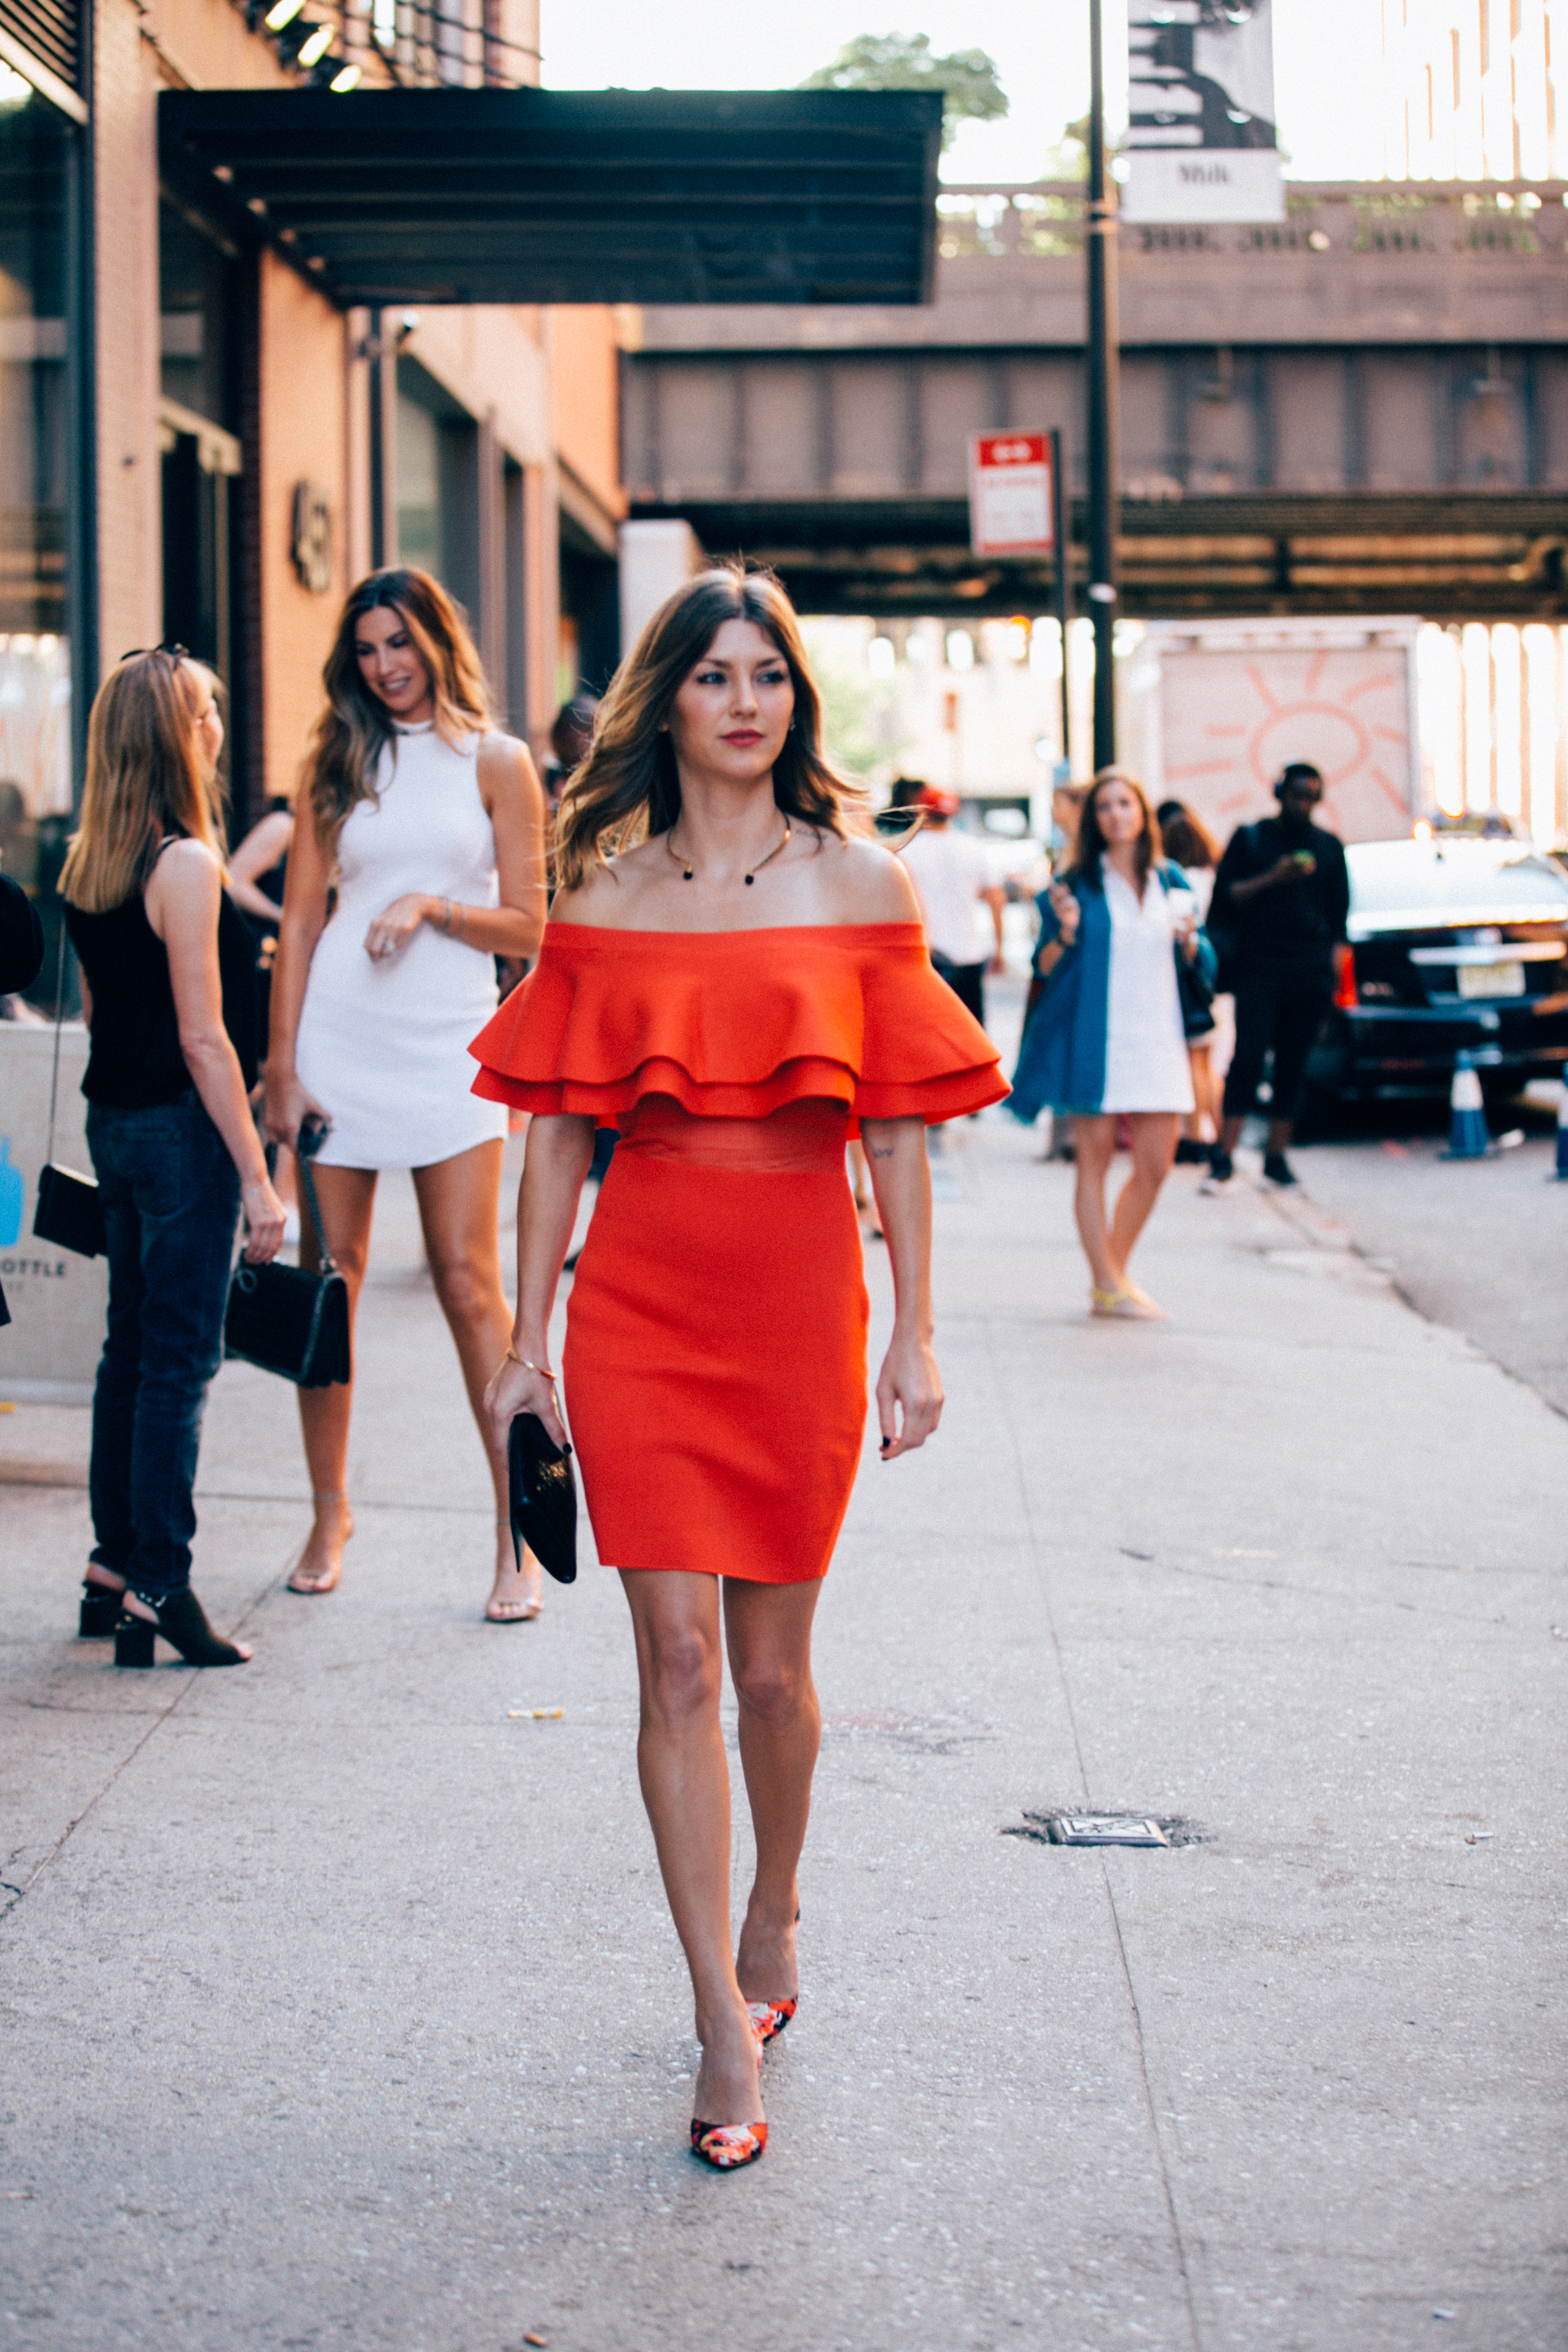 a girl in a red dress walking down the street